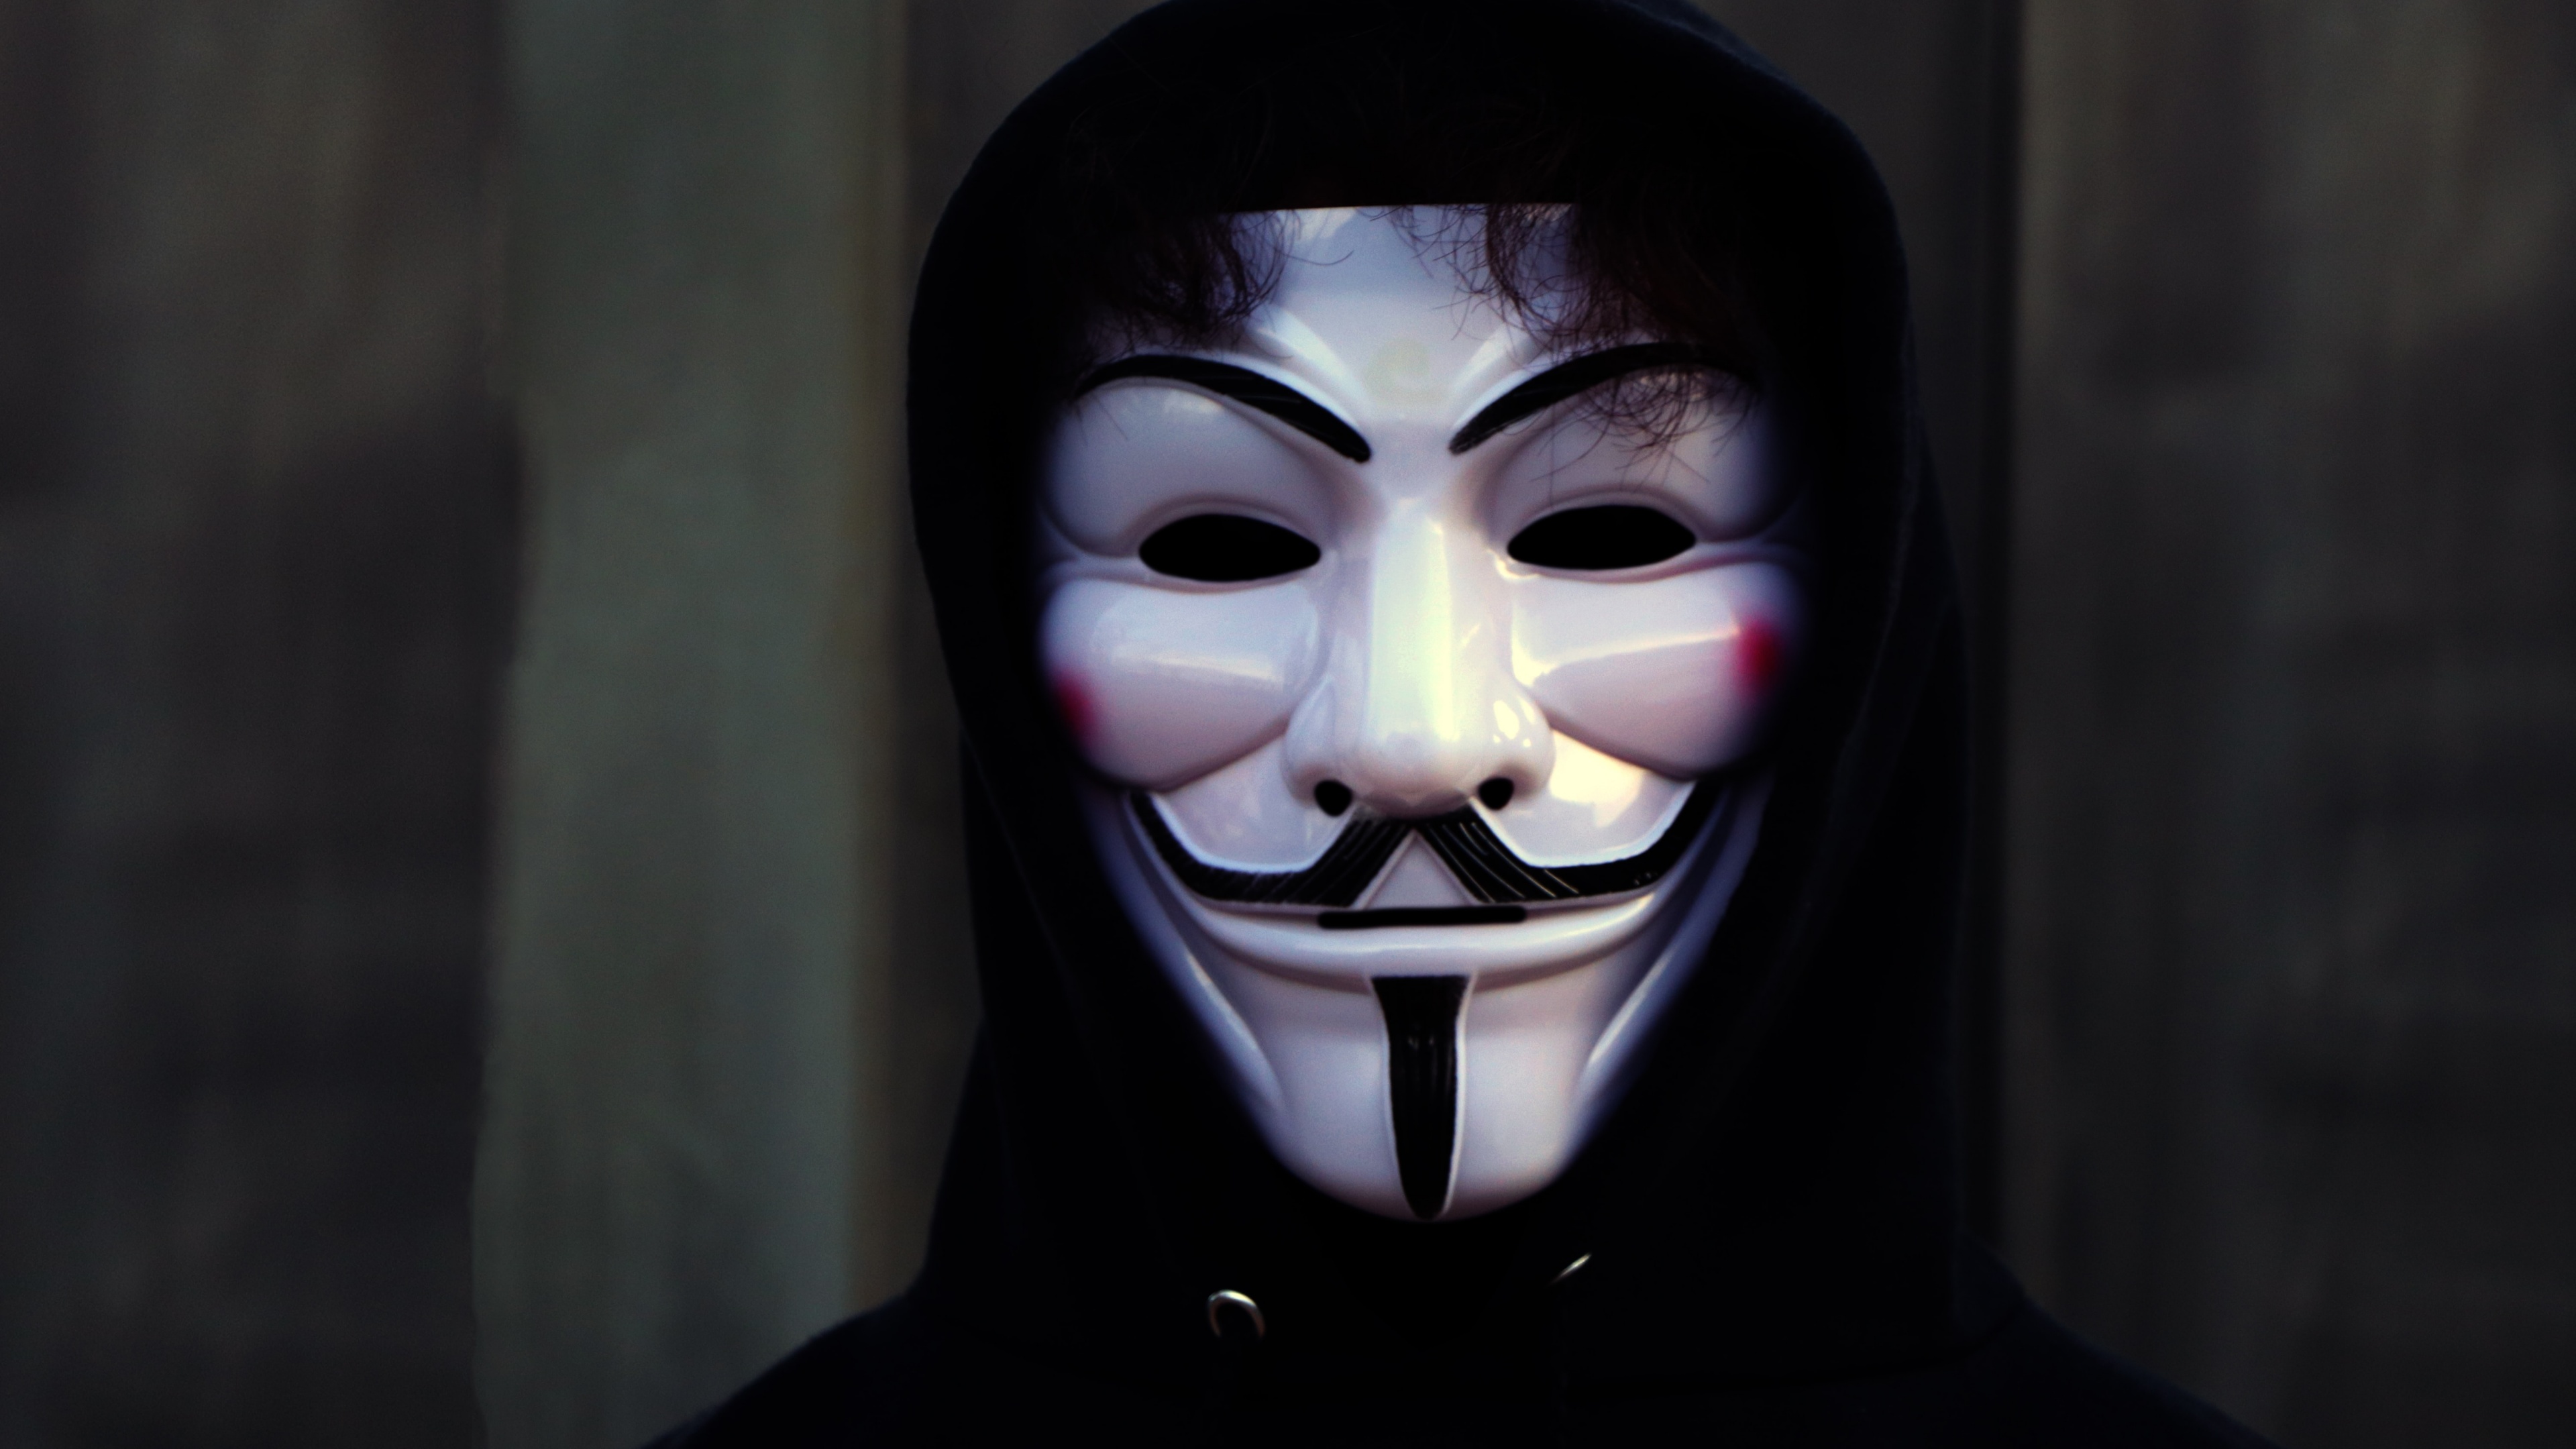 Man in Mask Wallpaper 4K, Anonymous, White masks, Photography, #2156